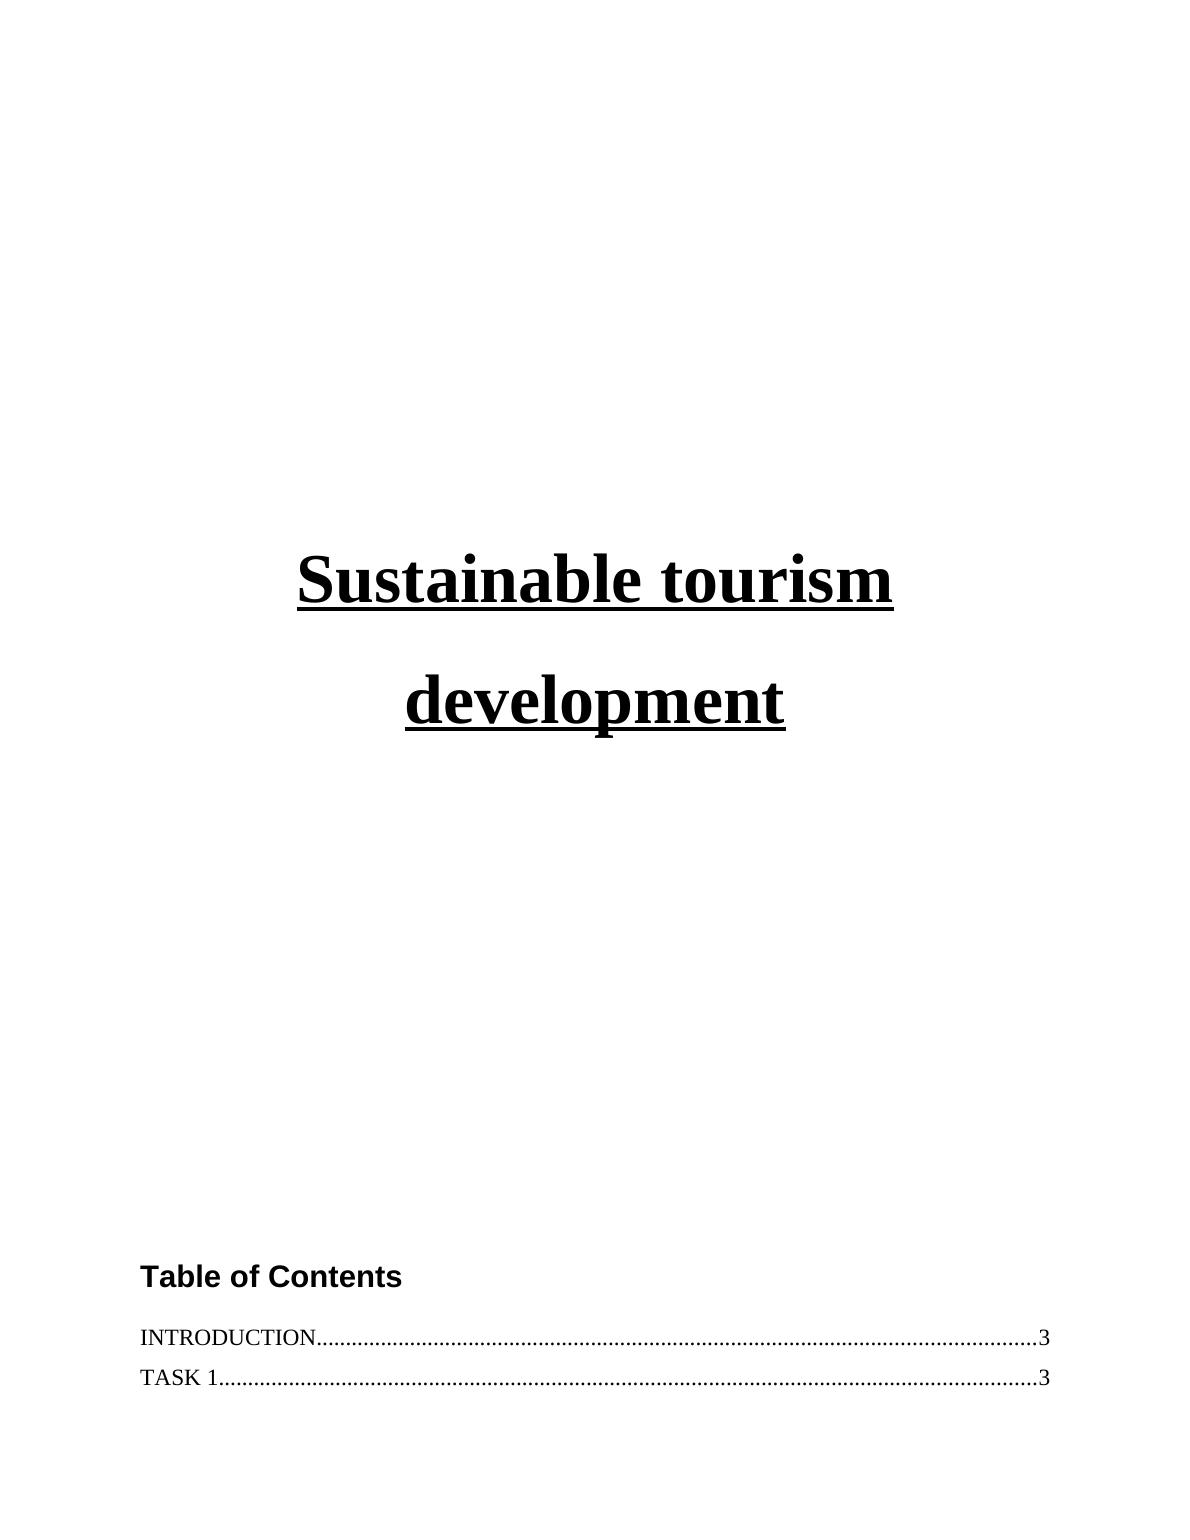 Report on Planning in Philippines Tourism Industry_1